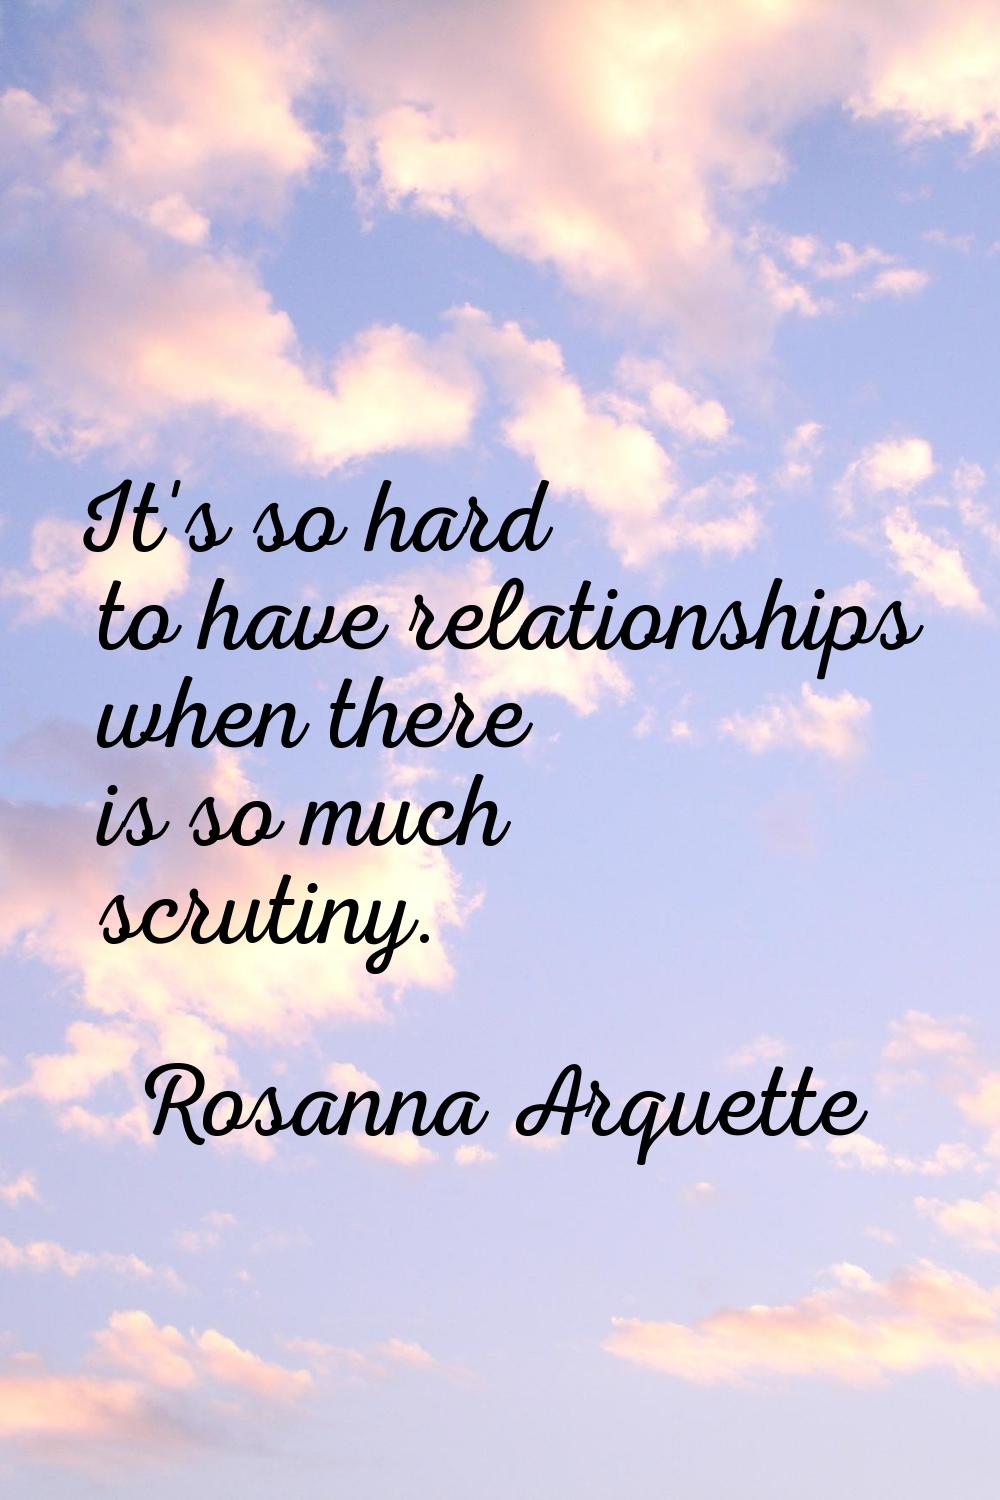 It's so hard to have relationships when there is so much scrutiny.